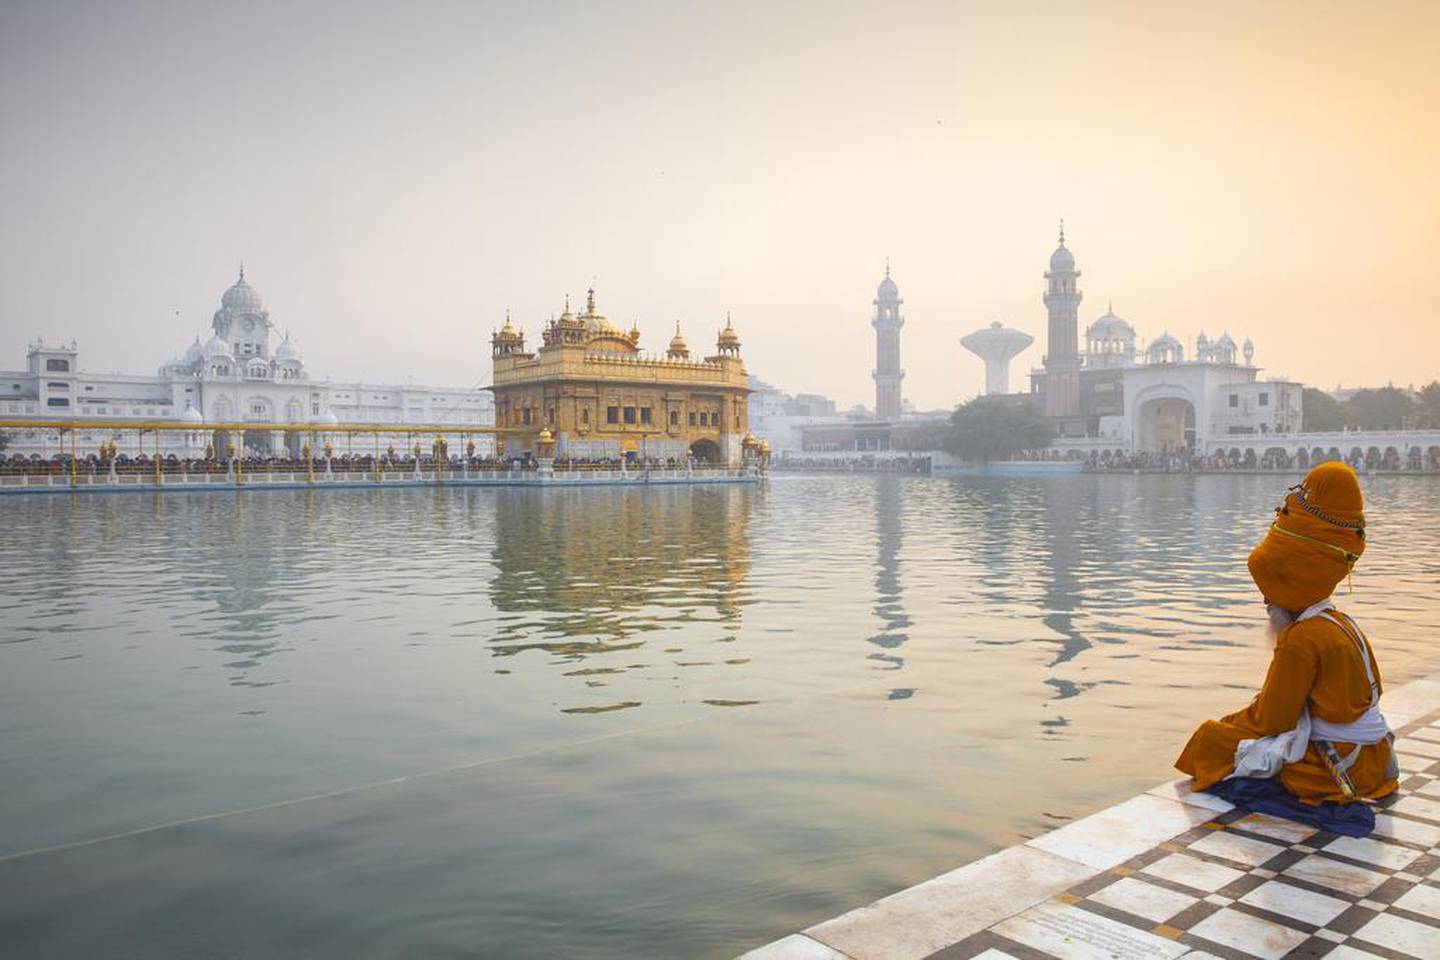 The Golden Temple, also known as Sri Harmandir Sahib, in Amritsar. Getty Images